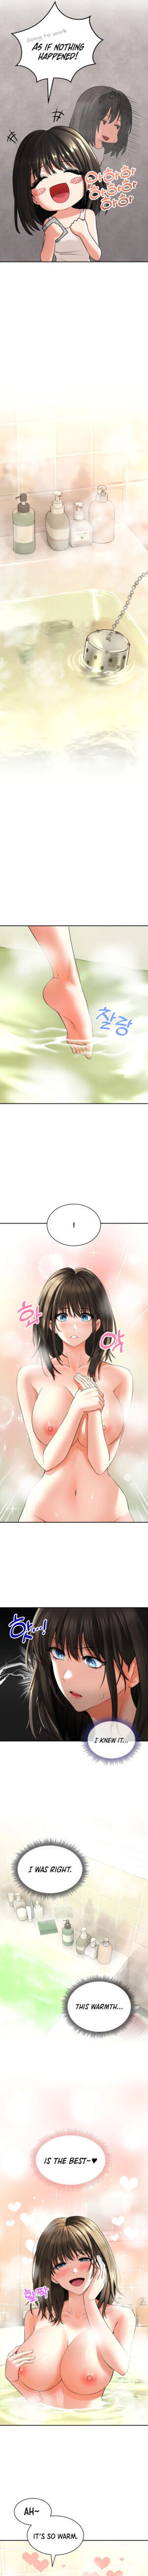 [Lee Juwon] Herbal Love Story (1-19) [English] [Omega Scans] [Ongoing]